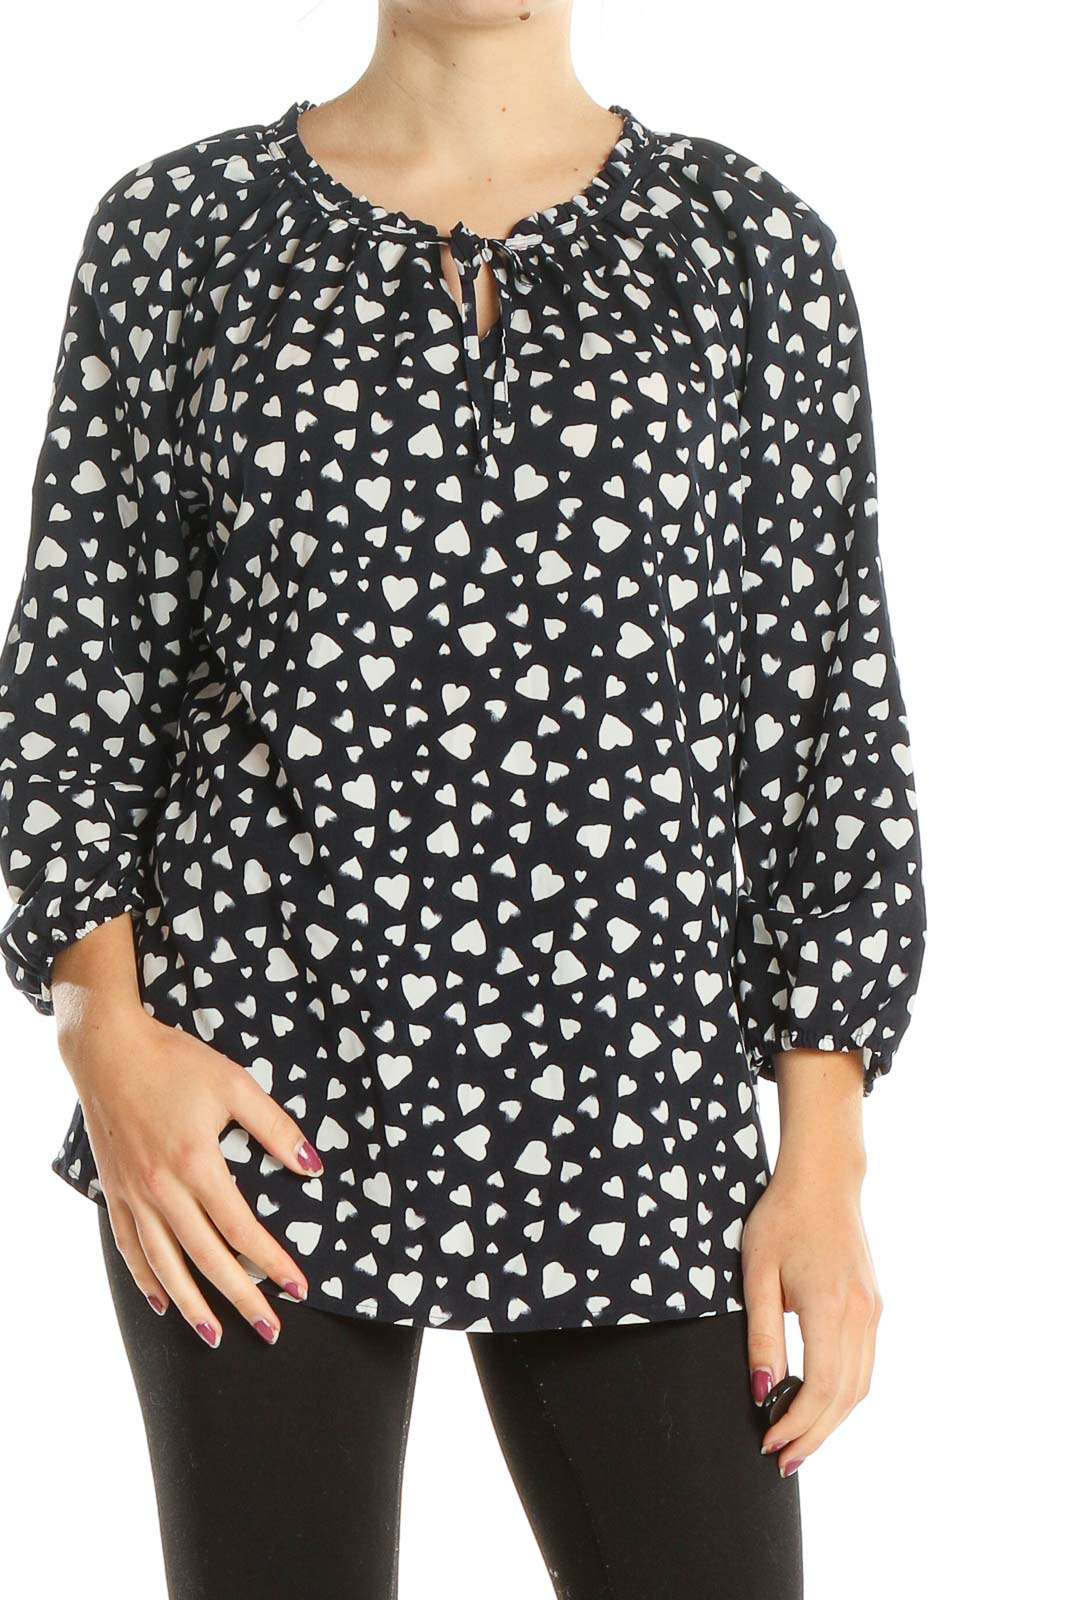 Blue Heart Print All Day Wear Top Front